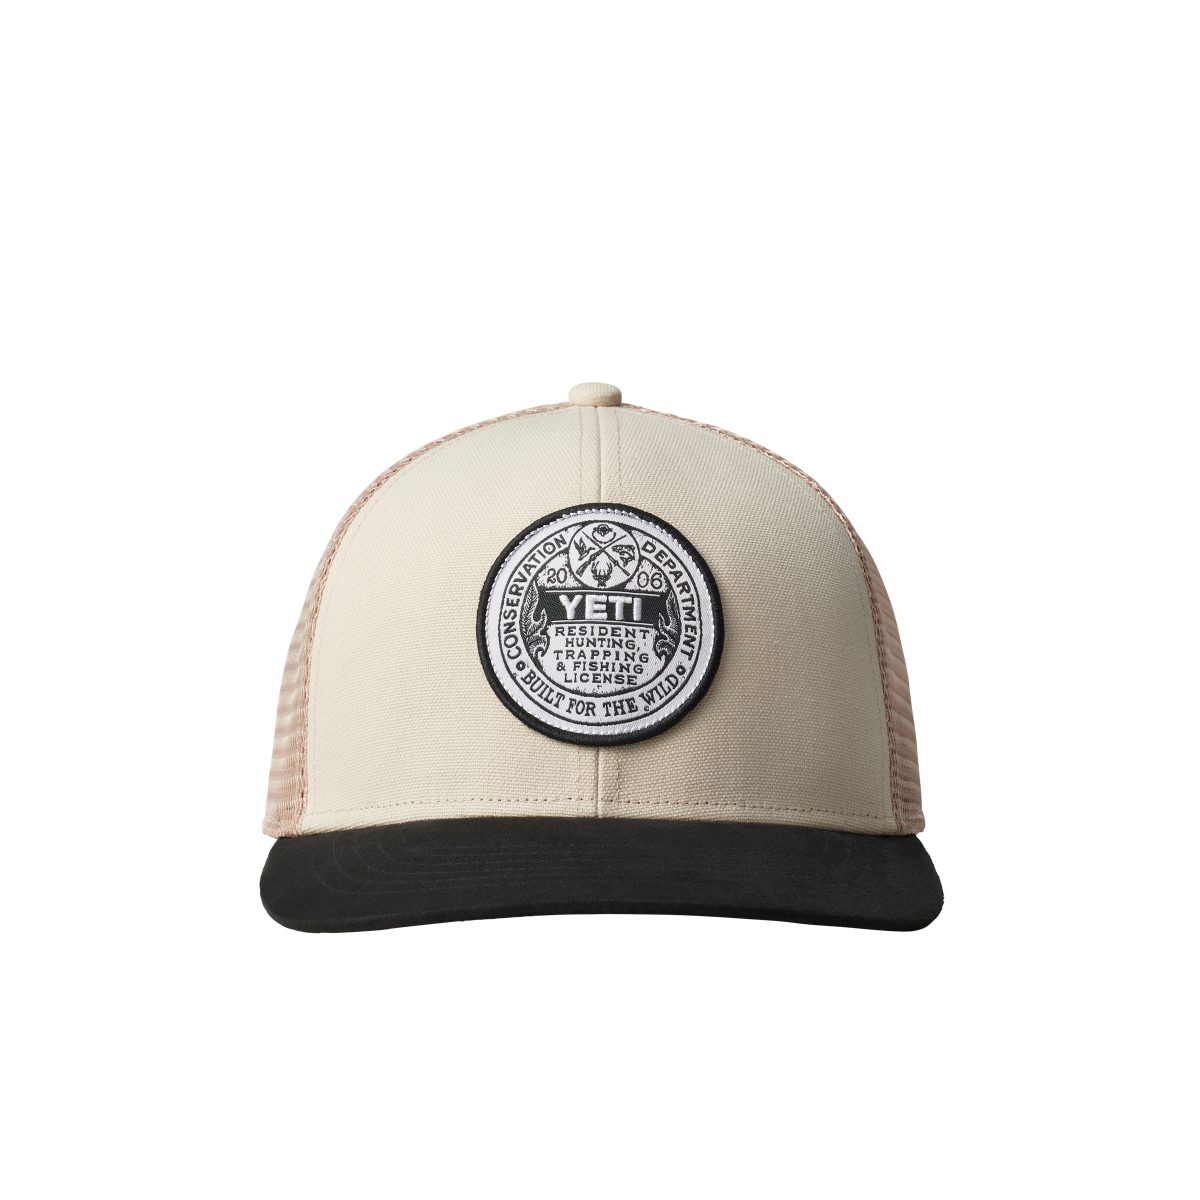 210173 Fall Apparel DealerImages YETI F21 Hats Trapping License Mid Pro Trucker Hat Sharptail Taupe Black Front 0629 Layers F 2400x2400 1